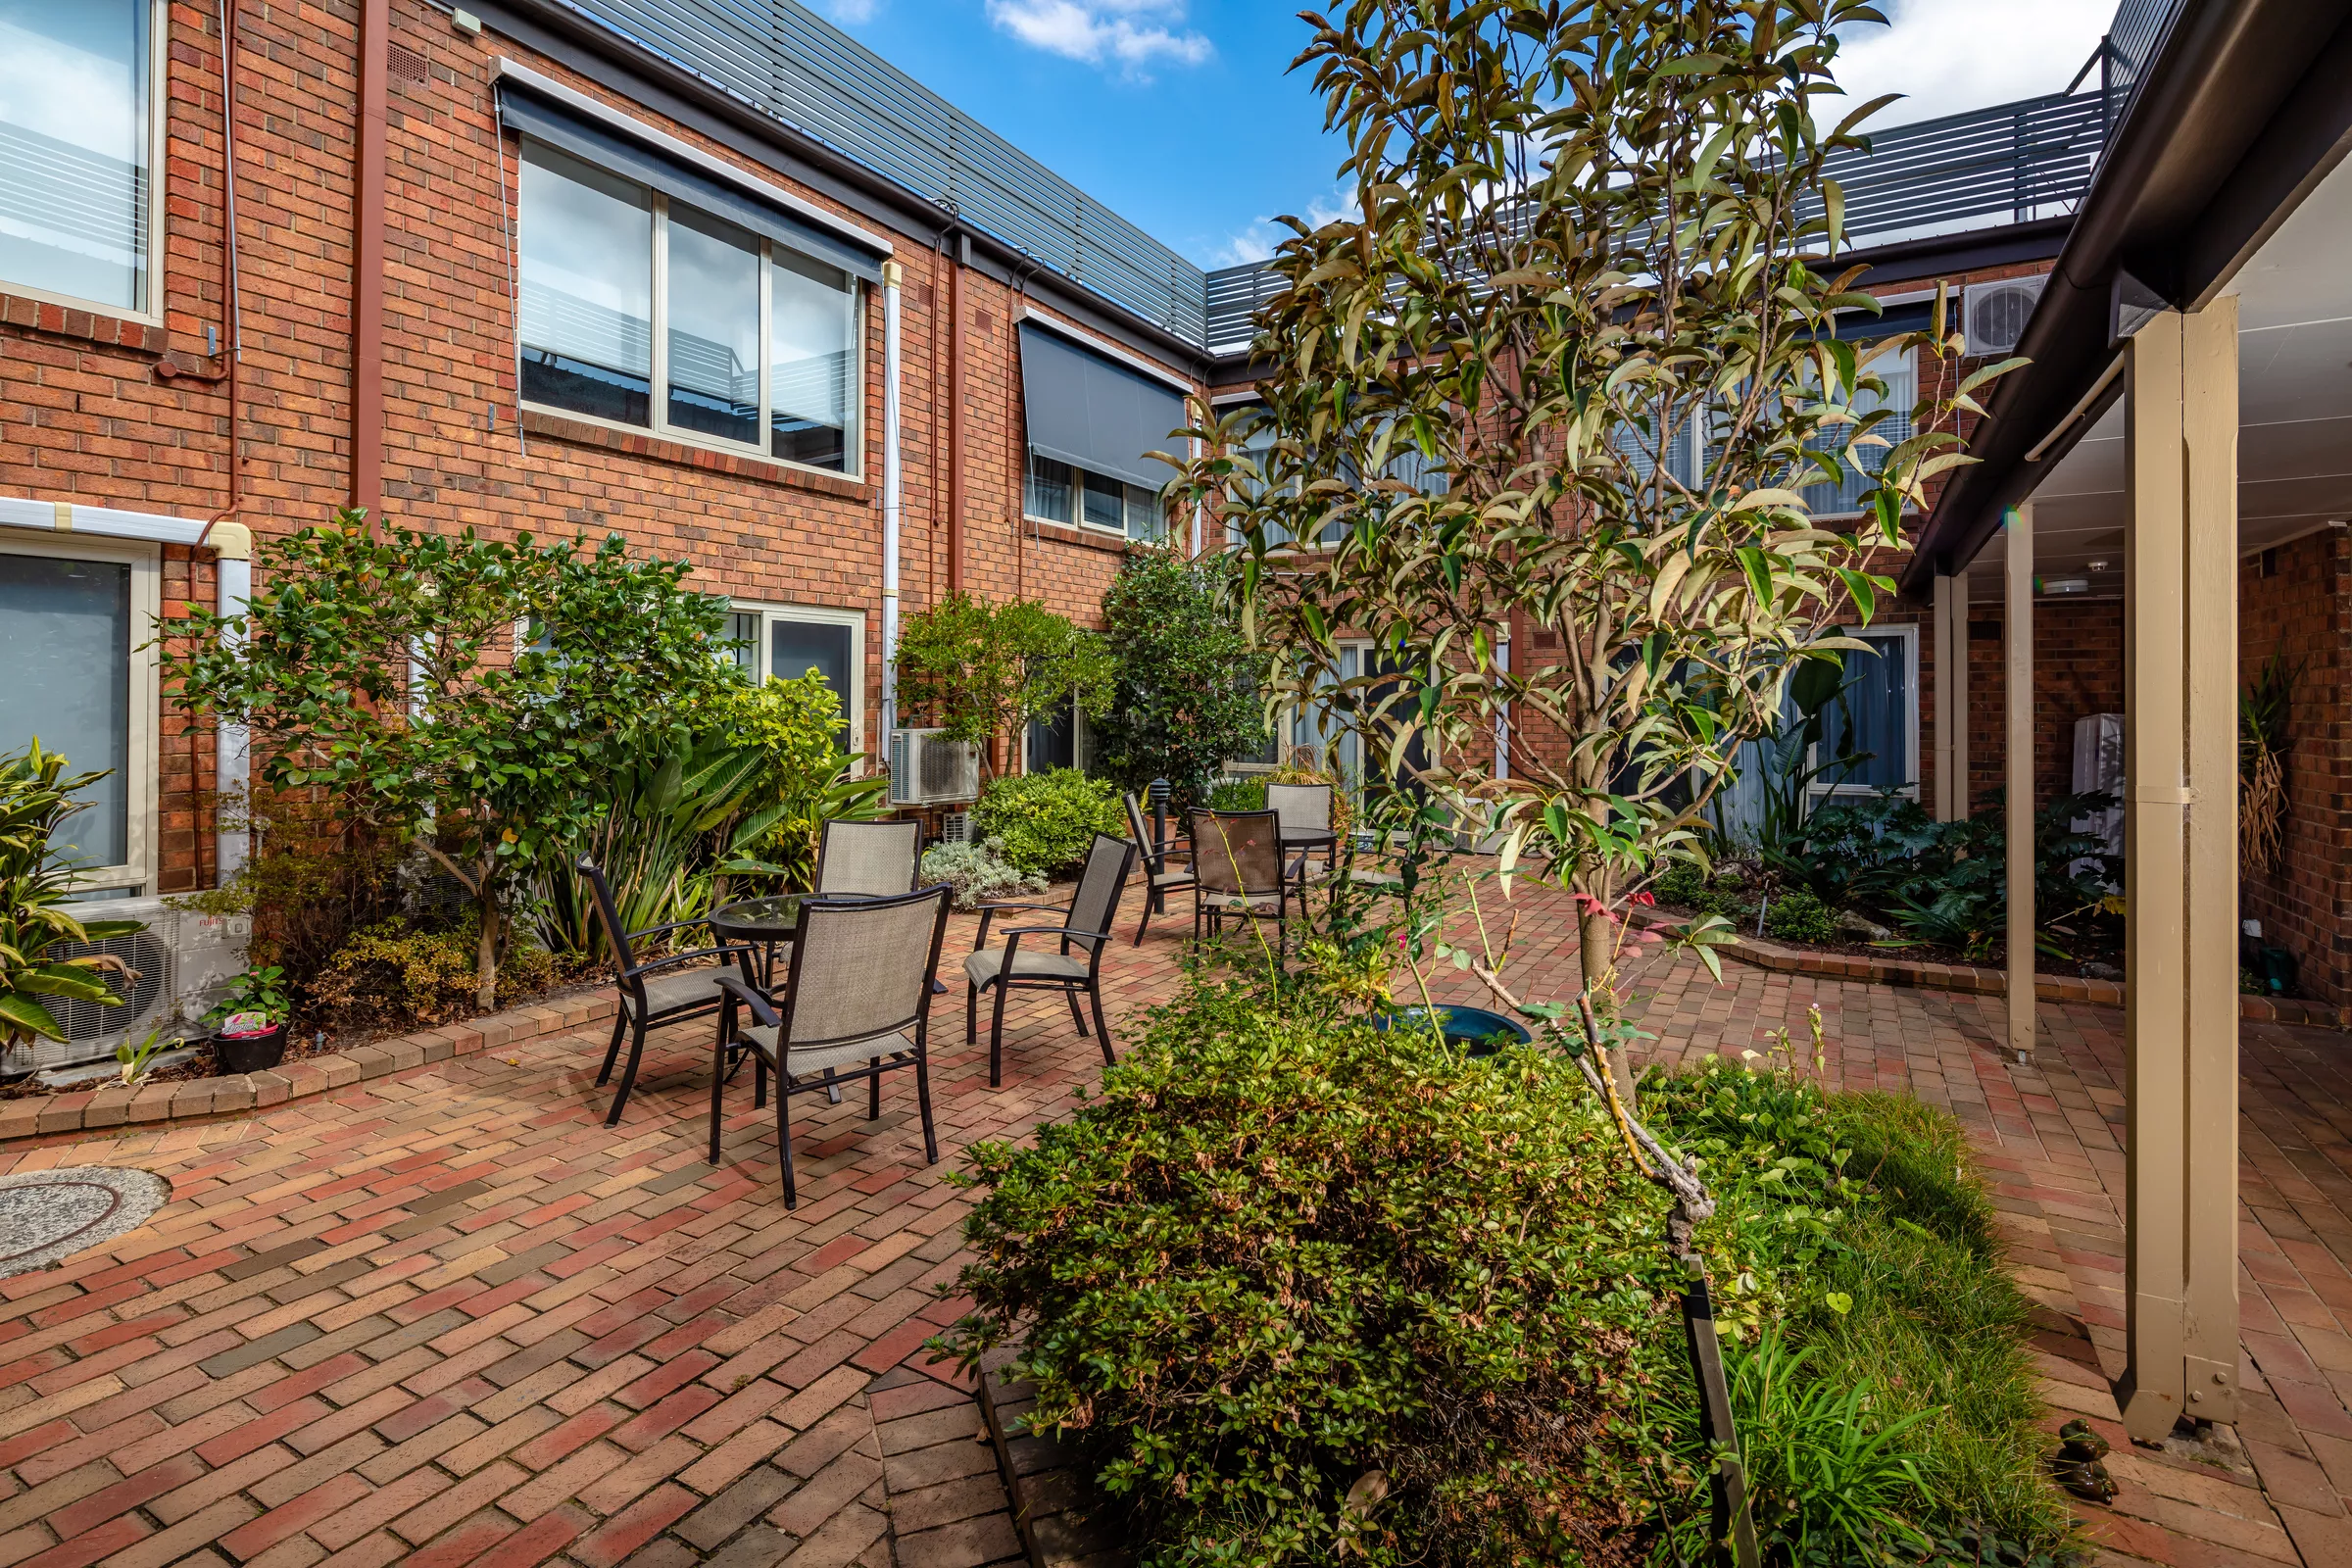 Highvale Village courtyard amongst building with courtyard garden, table and chairs